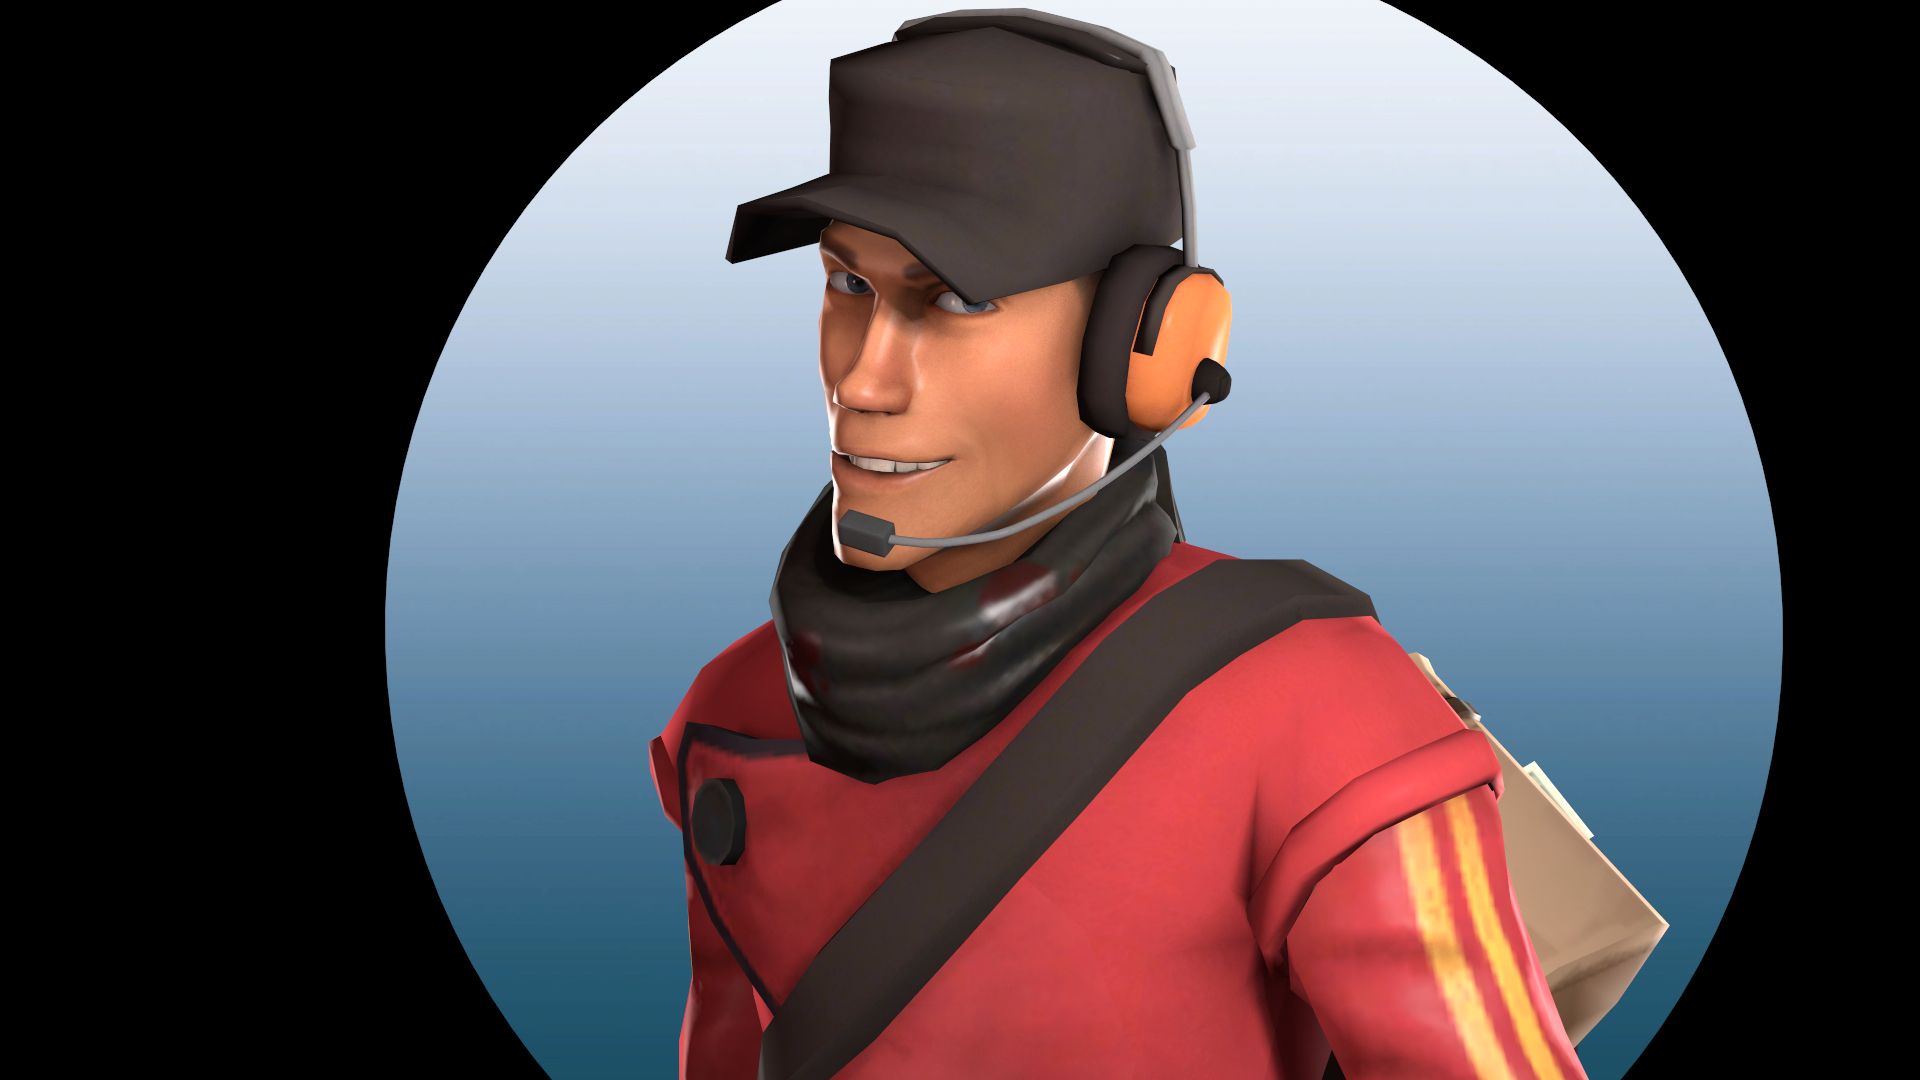 1920x1080 Made a poster for my scout loadout! #games #teamfortress2 #steam #tf2 #SteamNewRelease #gaming #Valve | Team fortress 2, Tf2 scout, Scout